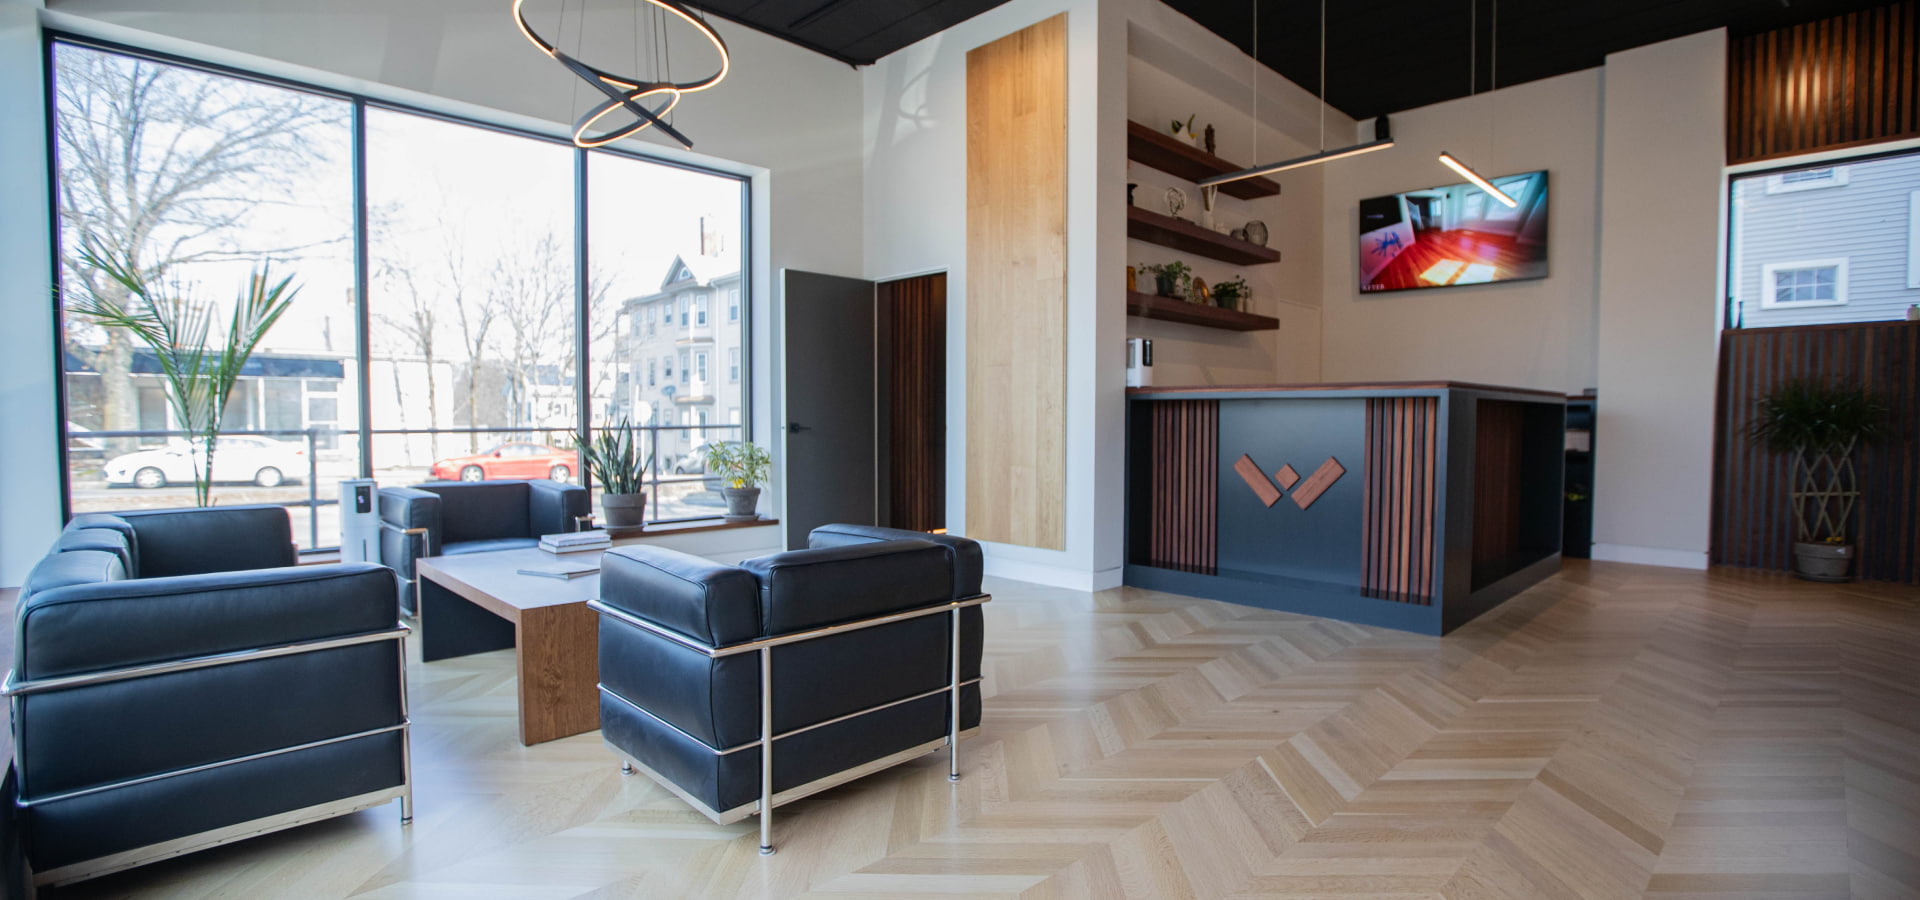 Weles showroom interior with large windows allowing natural light to illuminate the herringbone patterned wooden floor, sleek black leather chairs, a front desk with wooden slats and branding, shelving with decorative items, and a mounted TV screen.